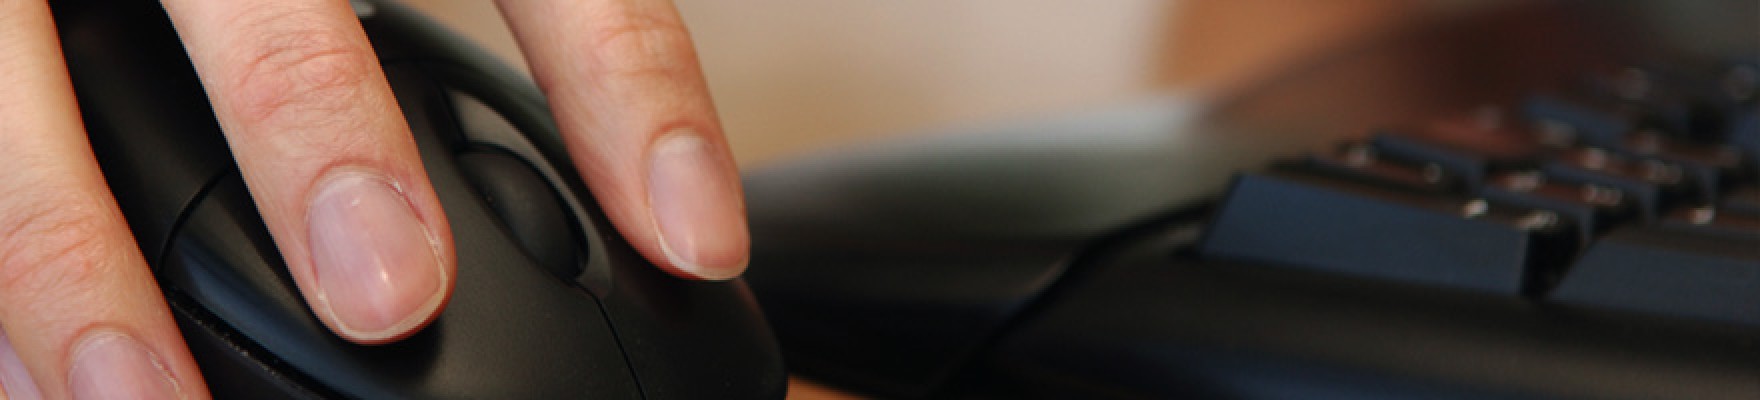 Close up of fingers on a computer mouse with keyboard in background.